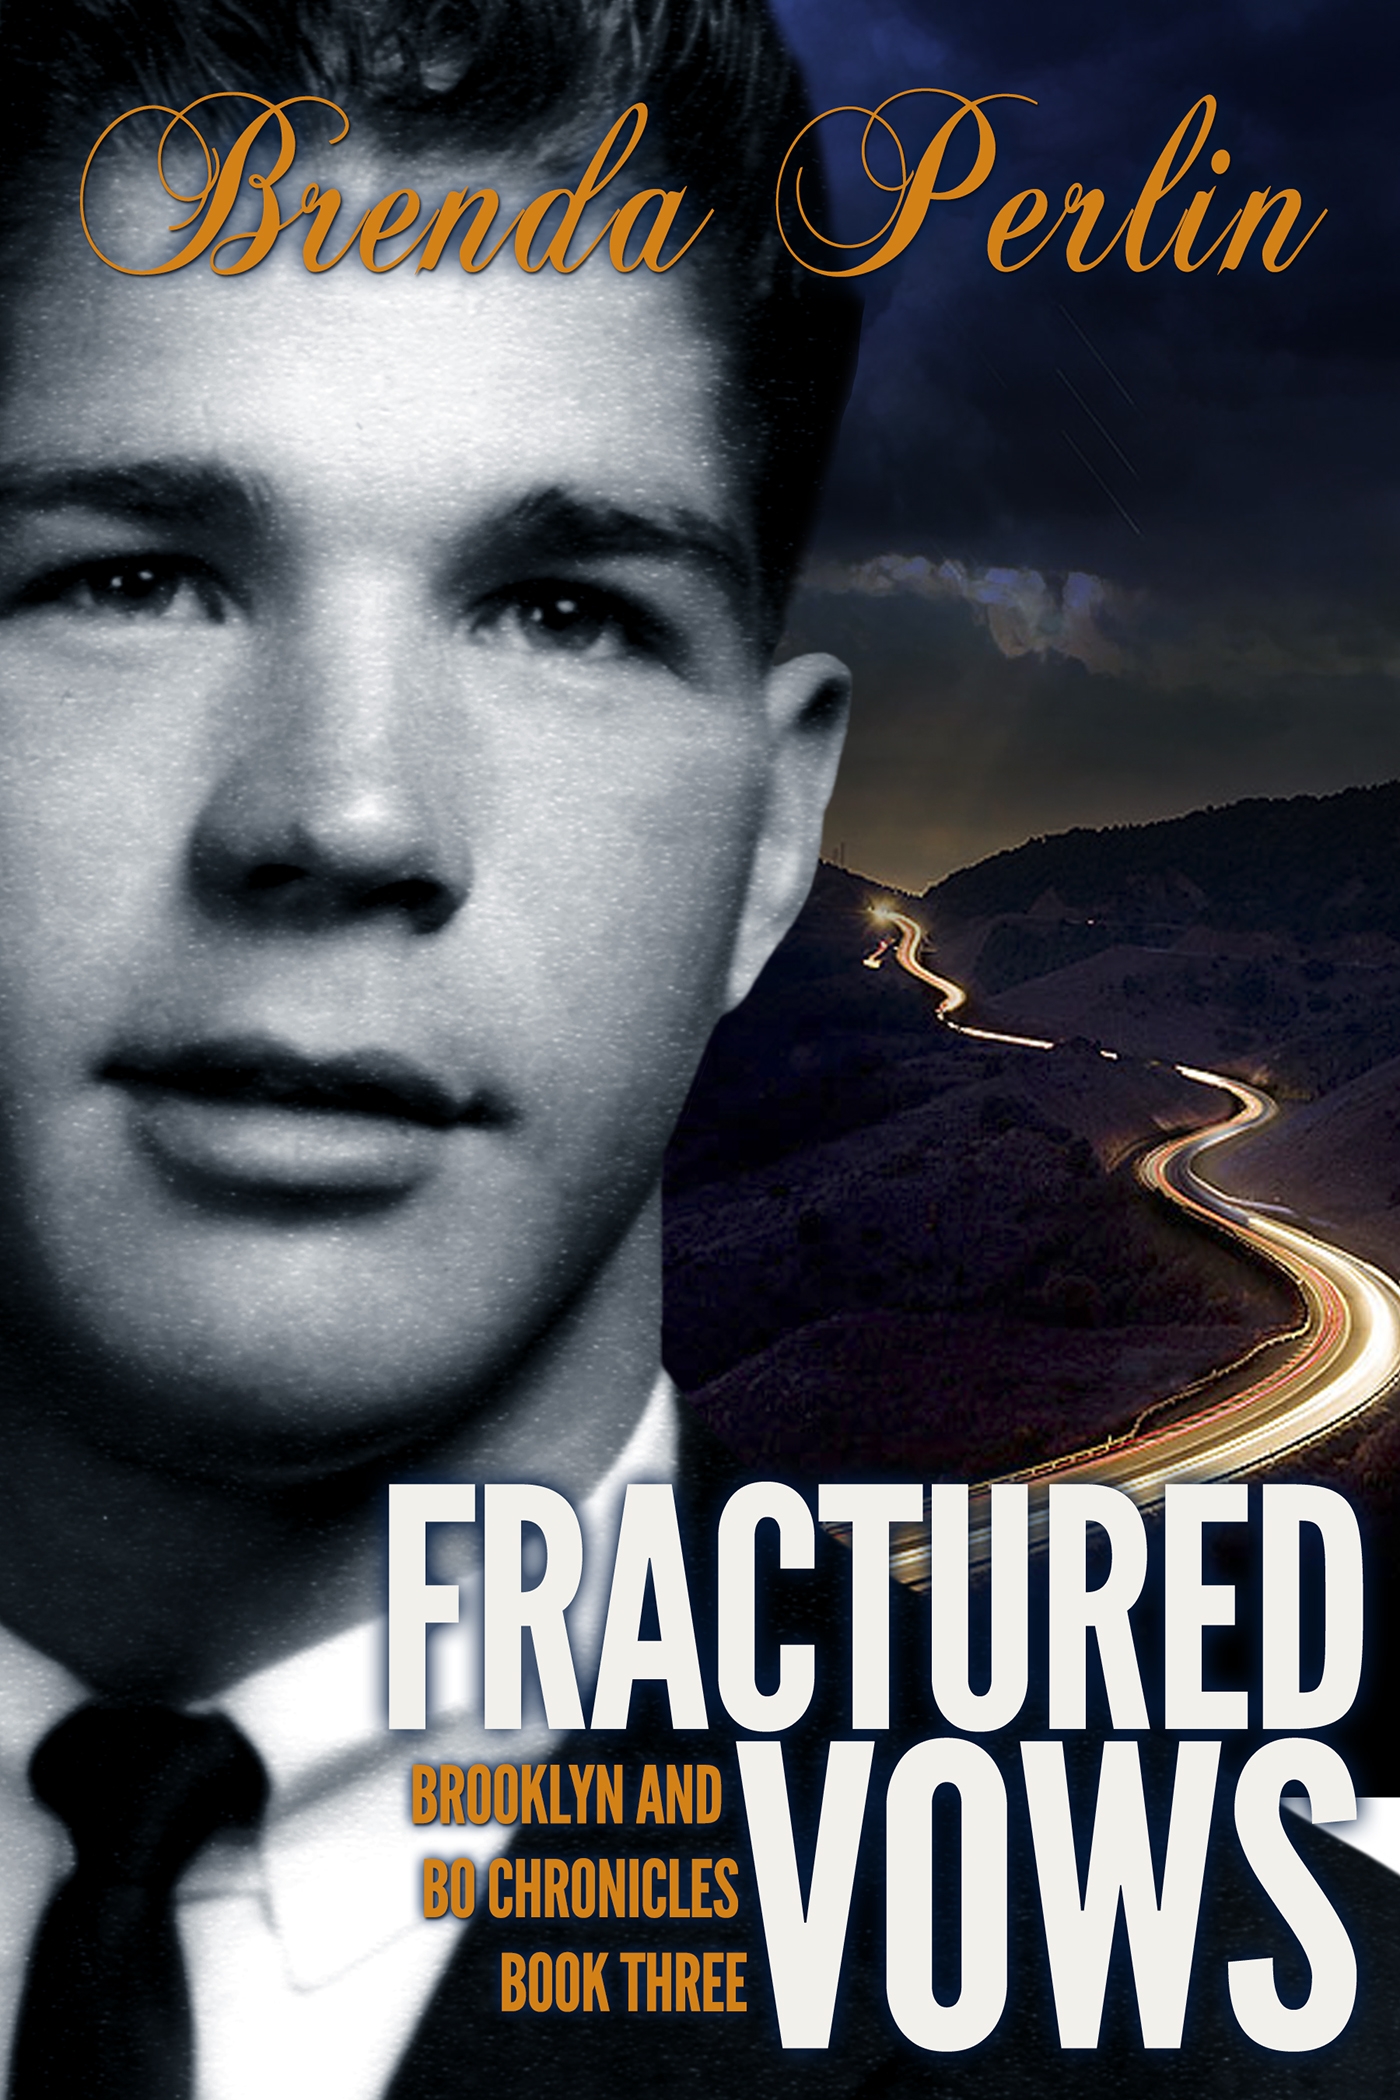 Fractured Vows (Brooklyn and Bo Chronicles: Book Three)